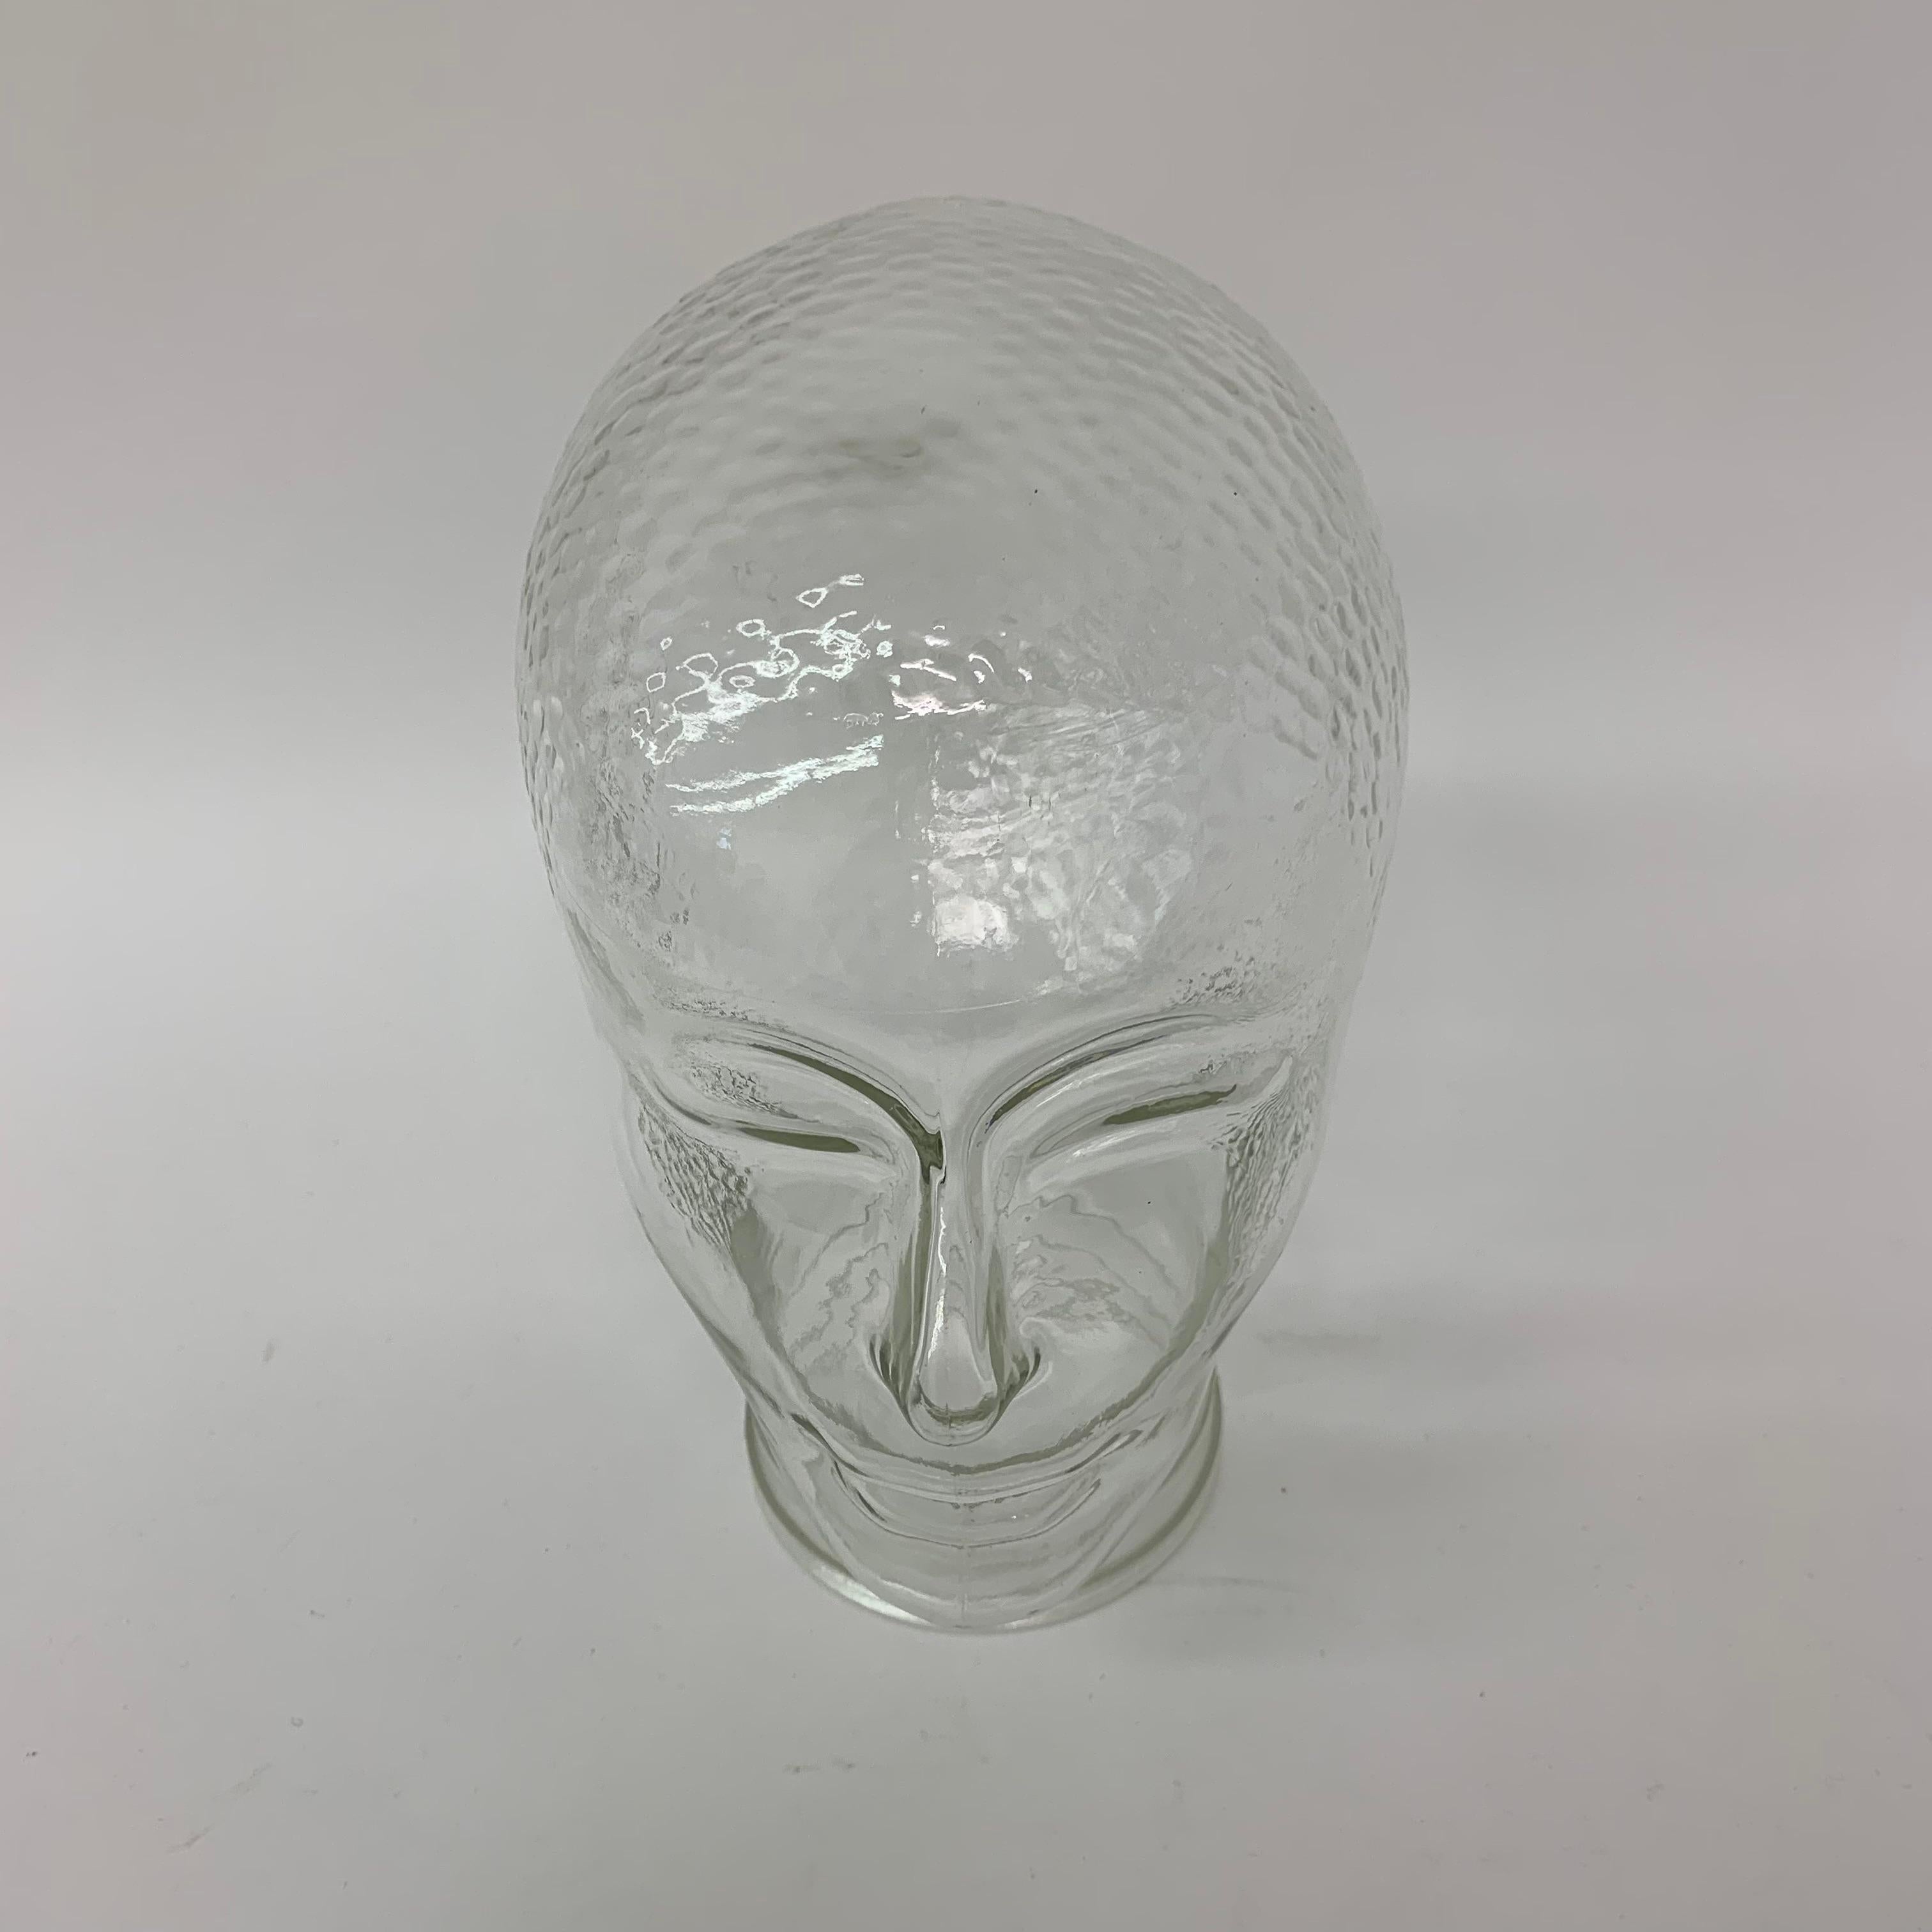 Dimensions: 25cm H

Period: 1970's

Material: Glass

Condition: Mint.